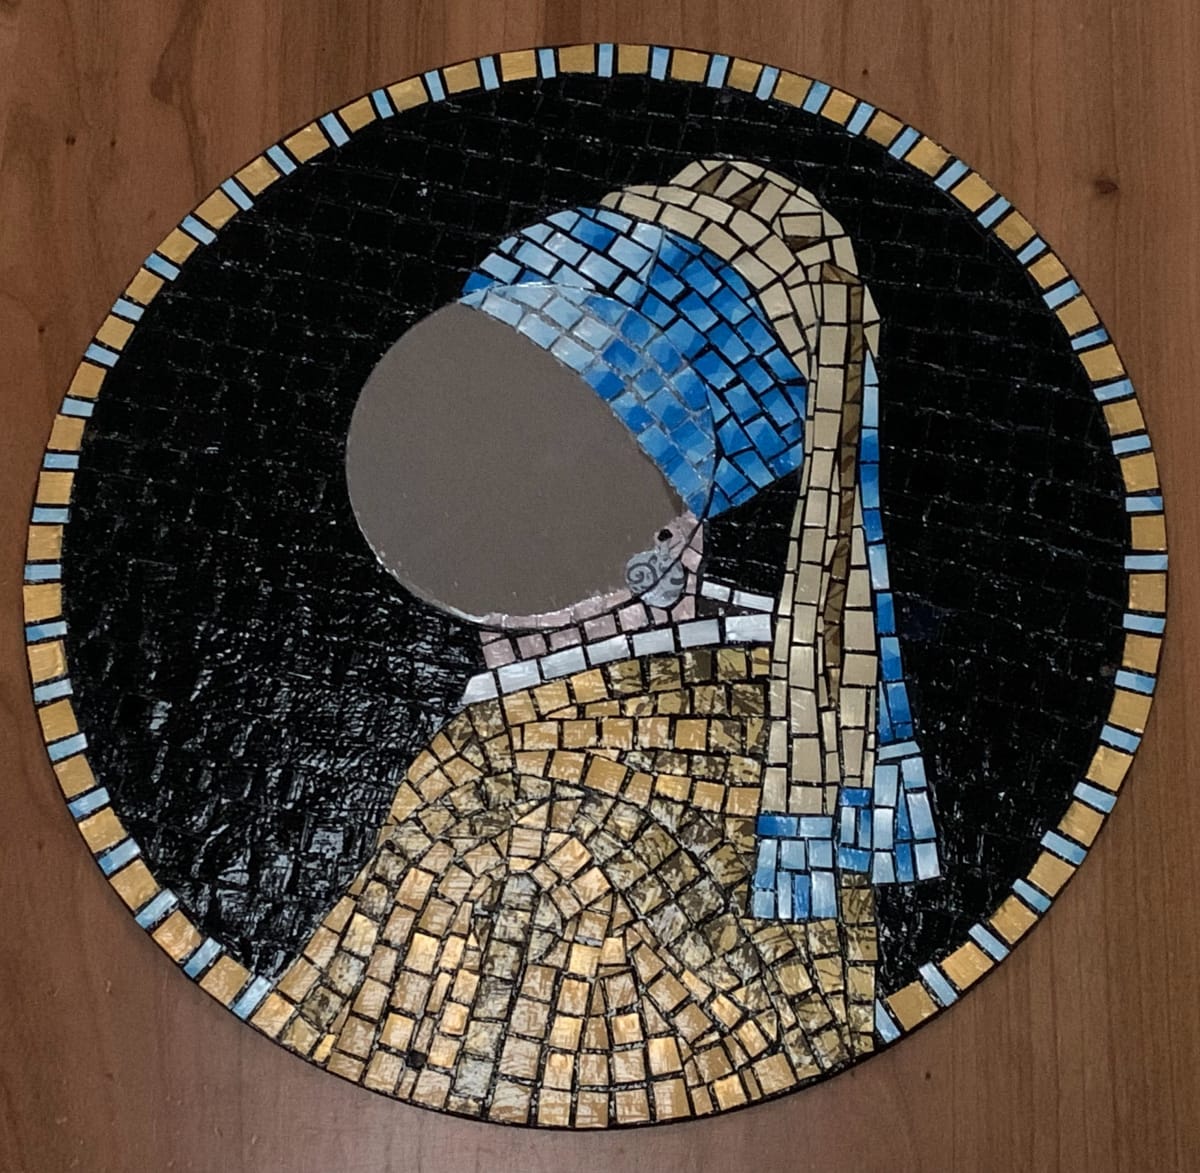 Girl with Pearl Earring mirror by Dina Afek  Image: The small round mirror allows anybody to see themselves in this iconic image.